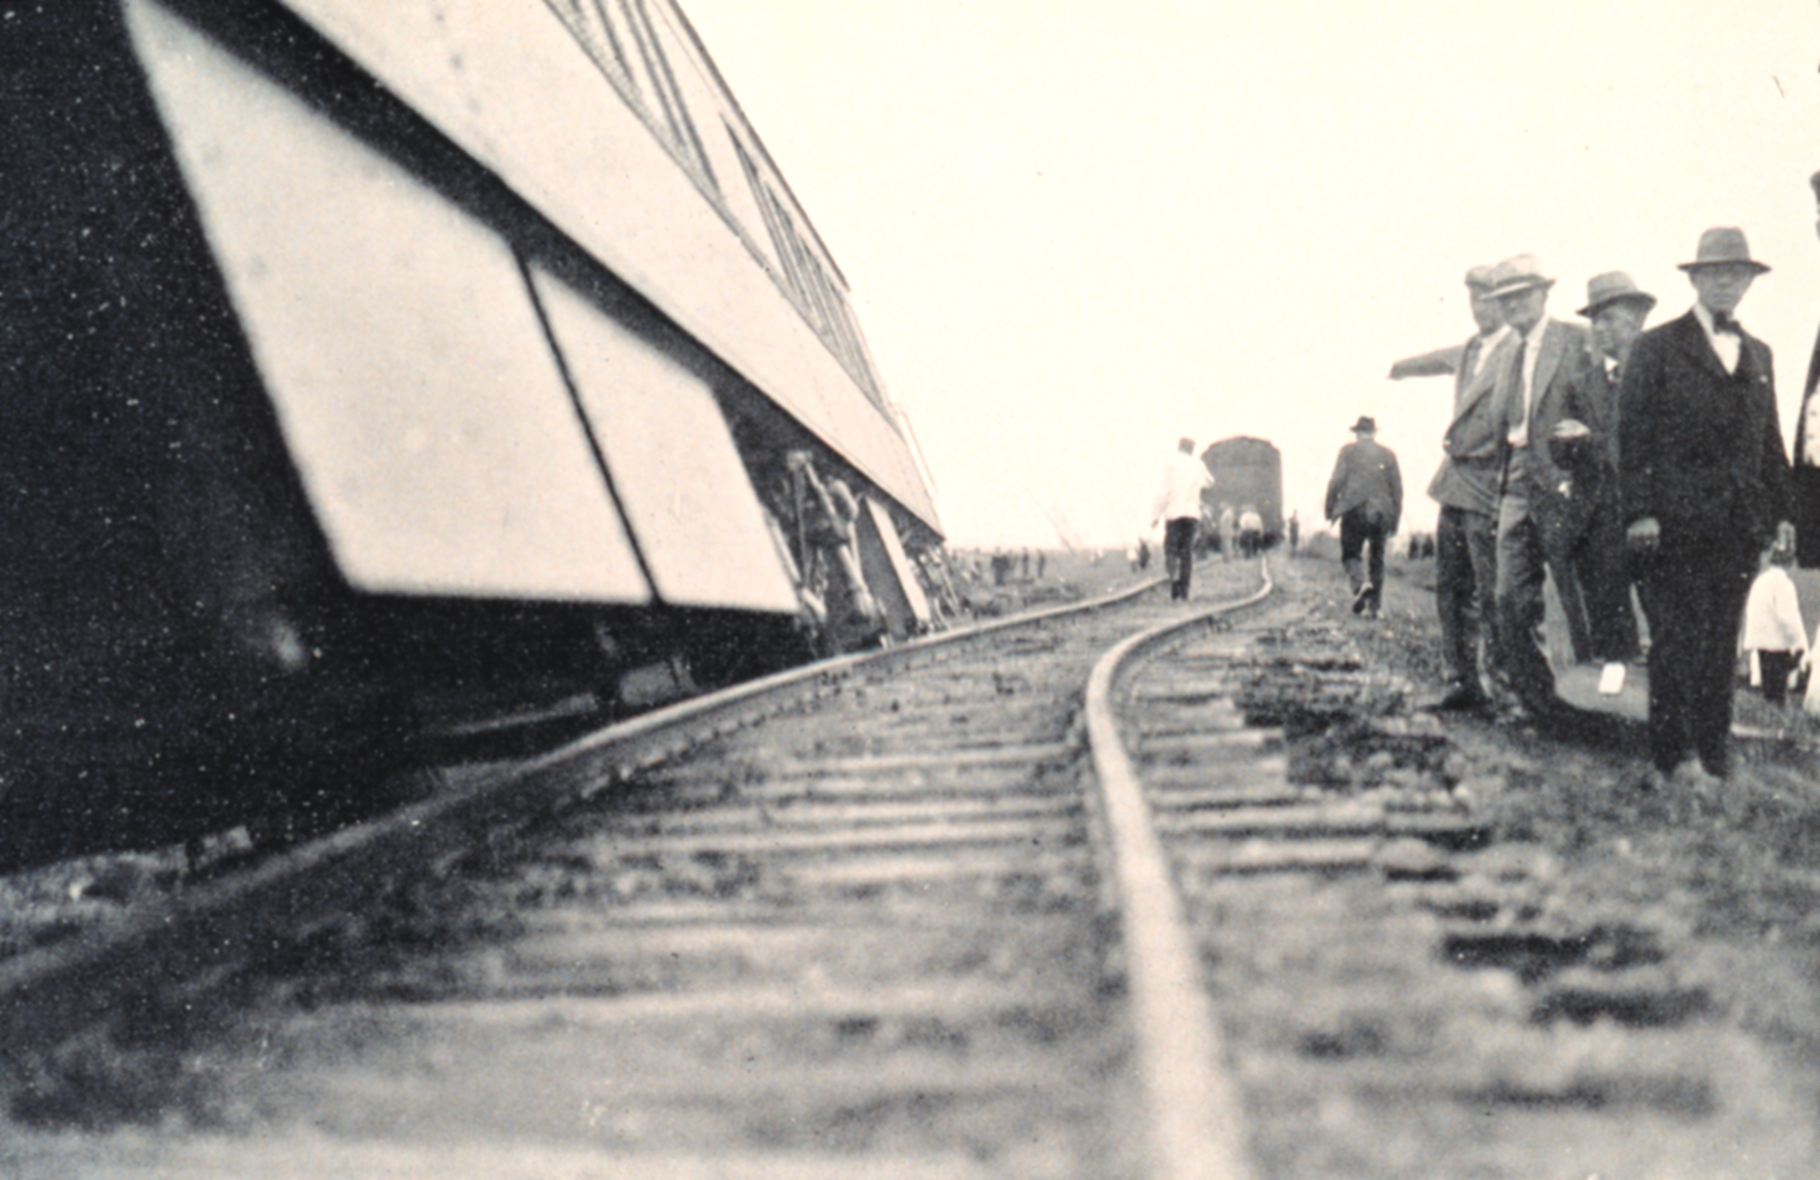 A passenger train that was derailed by a tornado east of Moorhead, Minnesota on May 27, 1931.